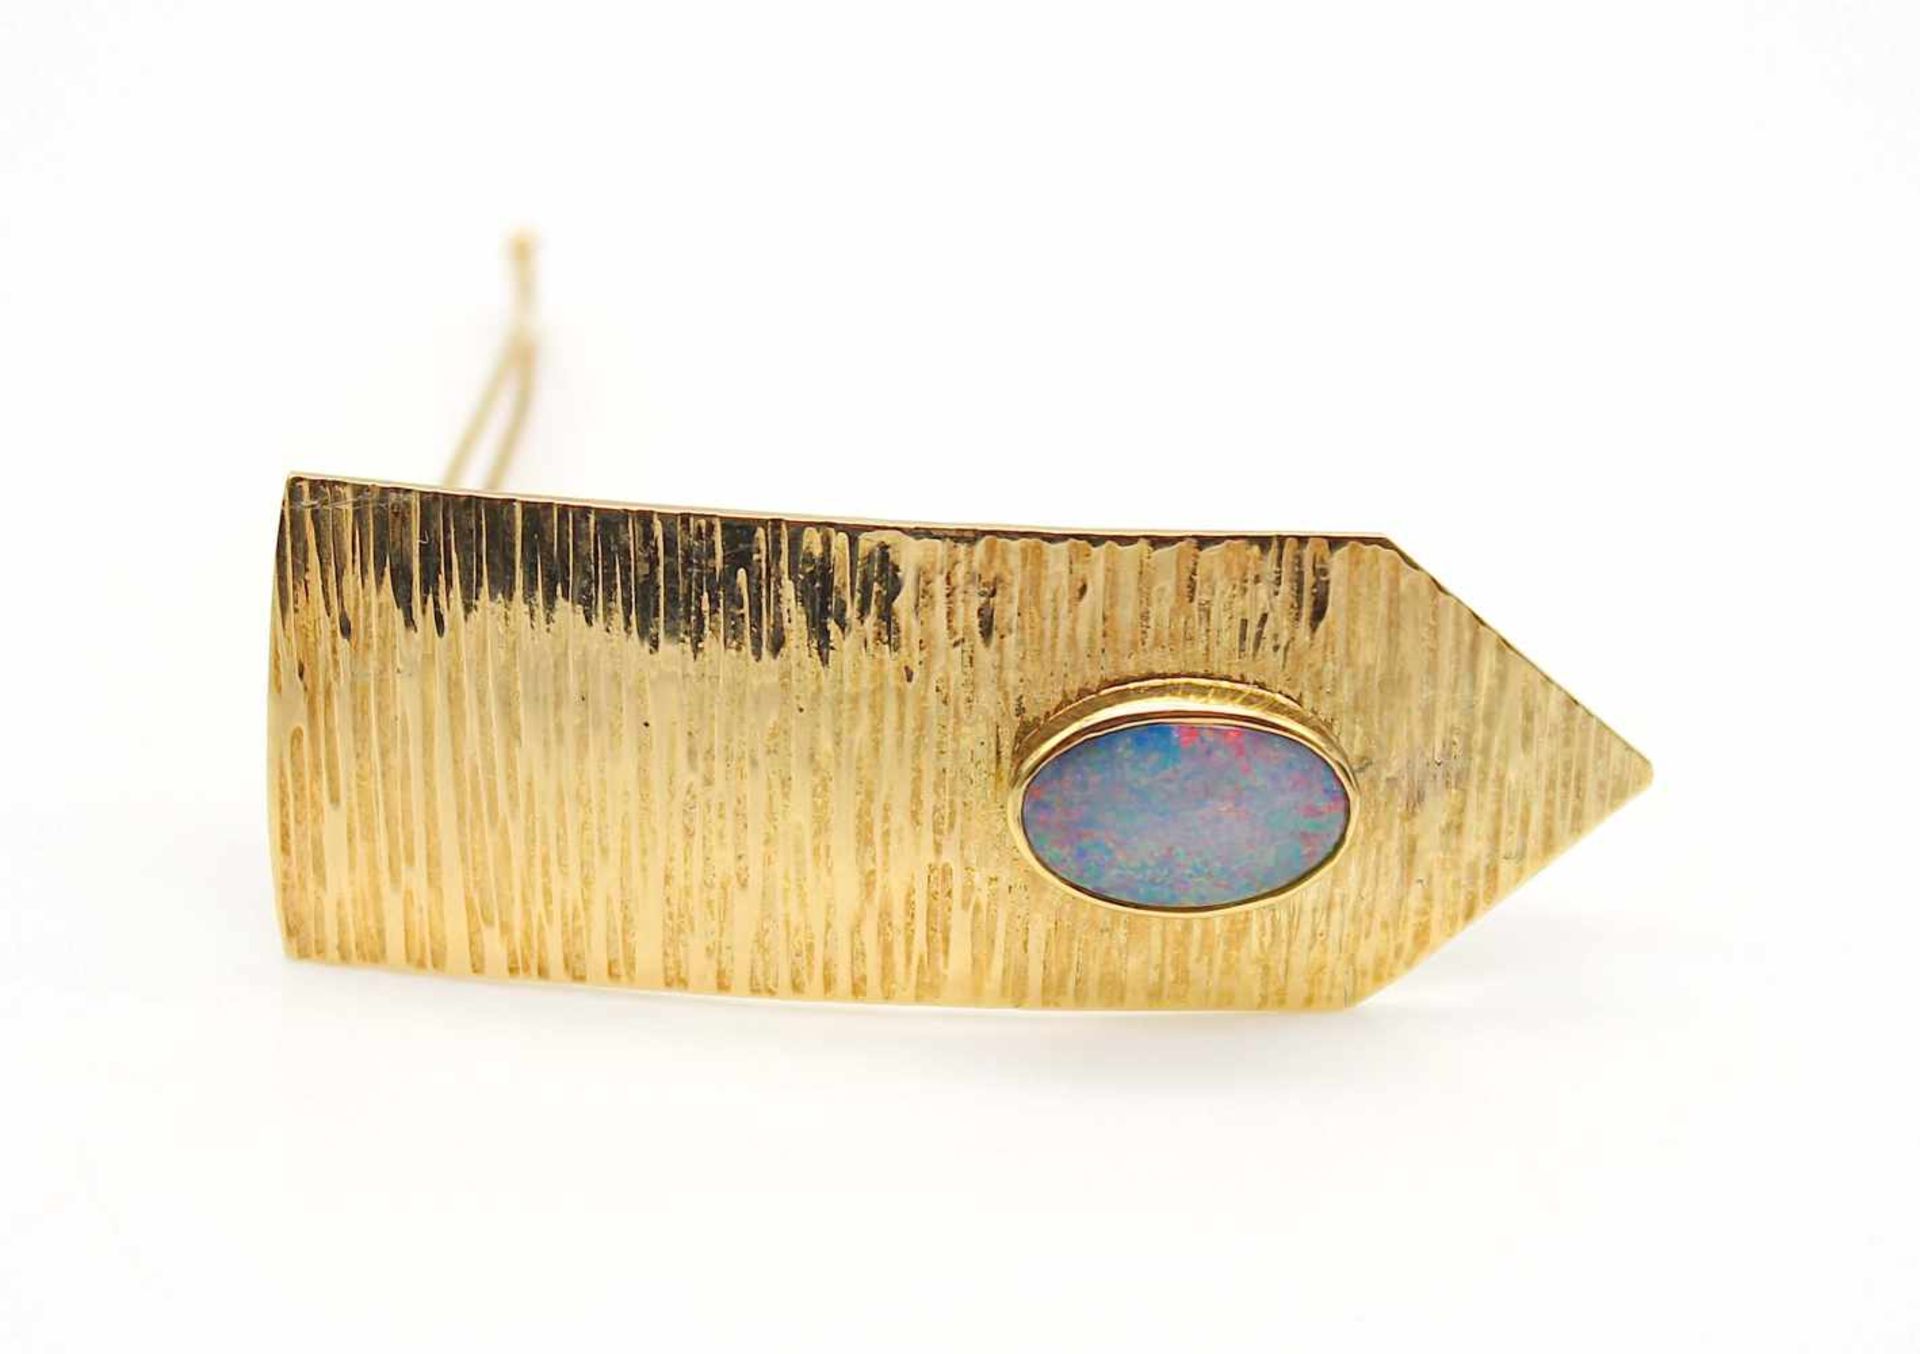 Hairgrip made of 585 gold with a precious opal. Weight 10,4 g, dimensions 54,8 x 20,6 mmHaarklemme